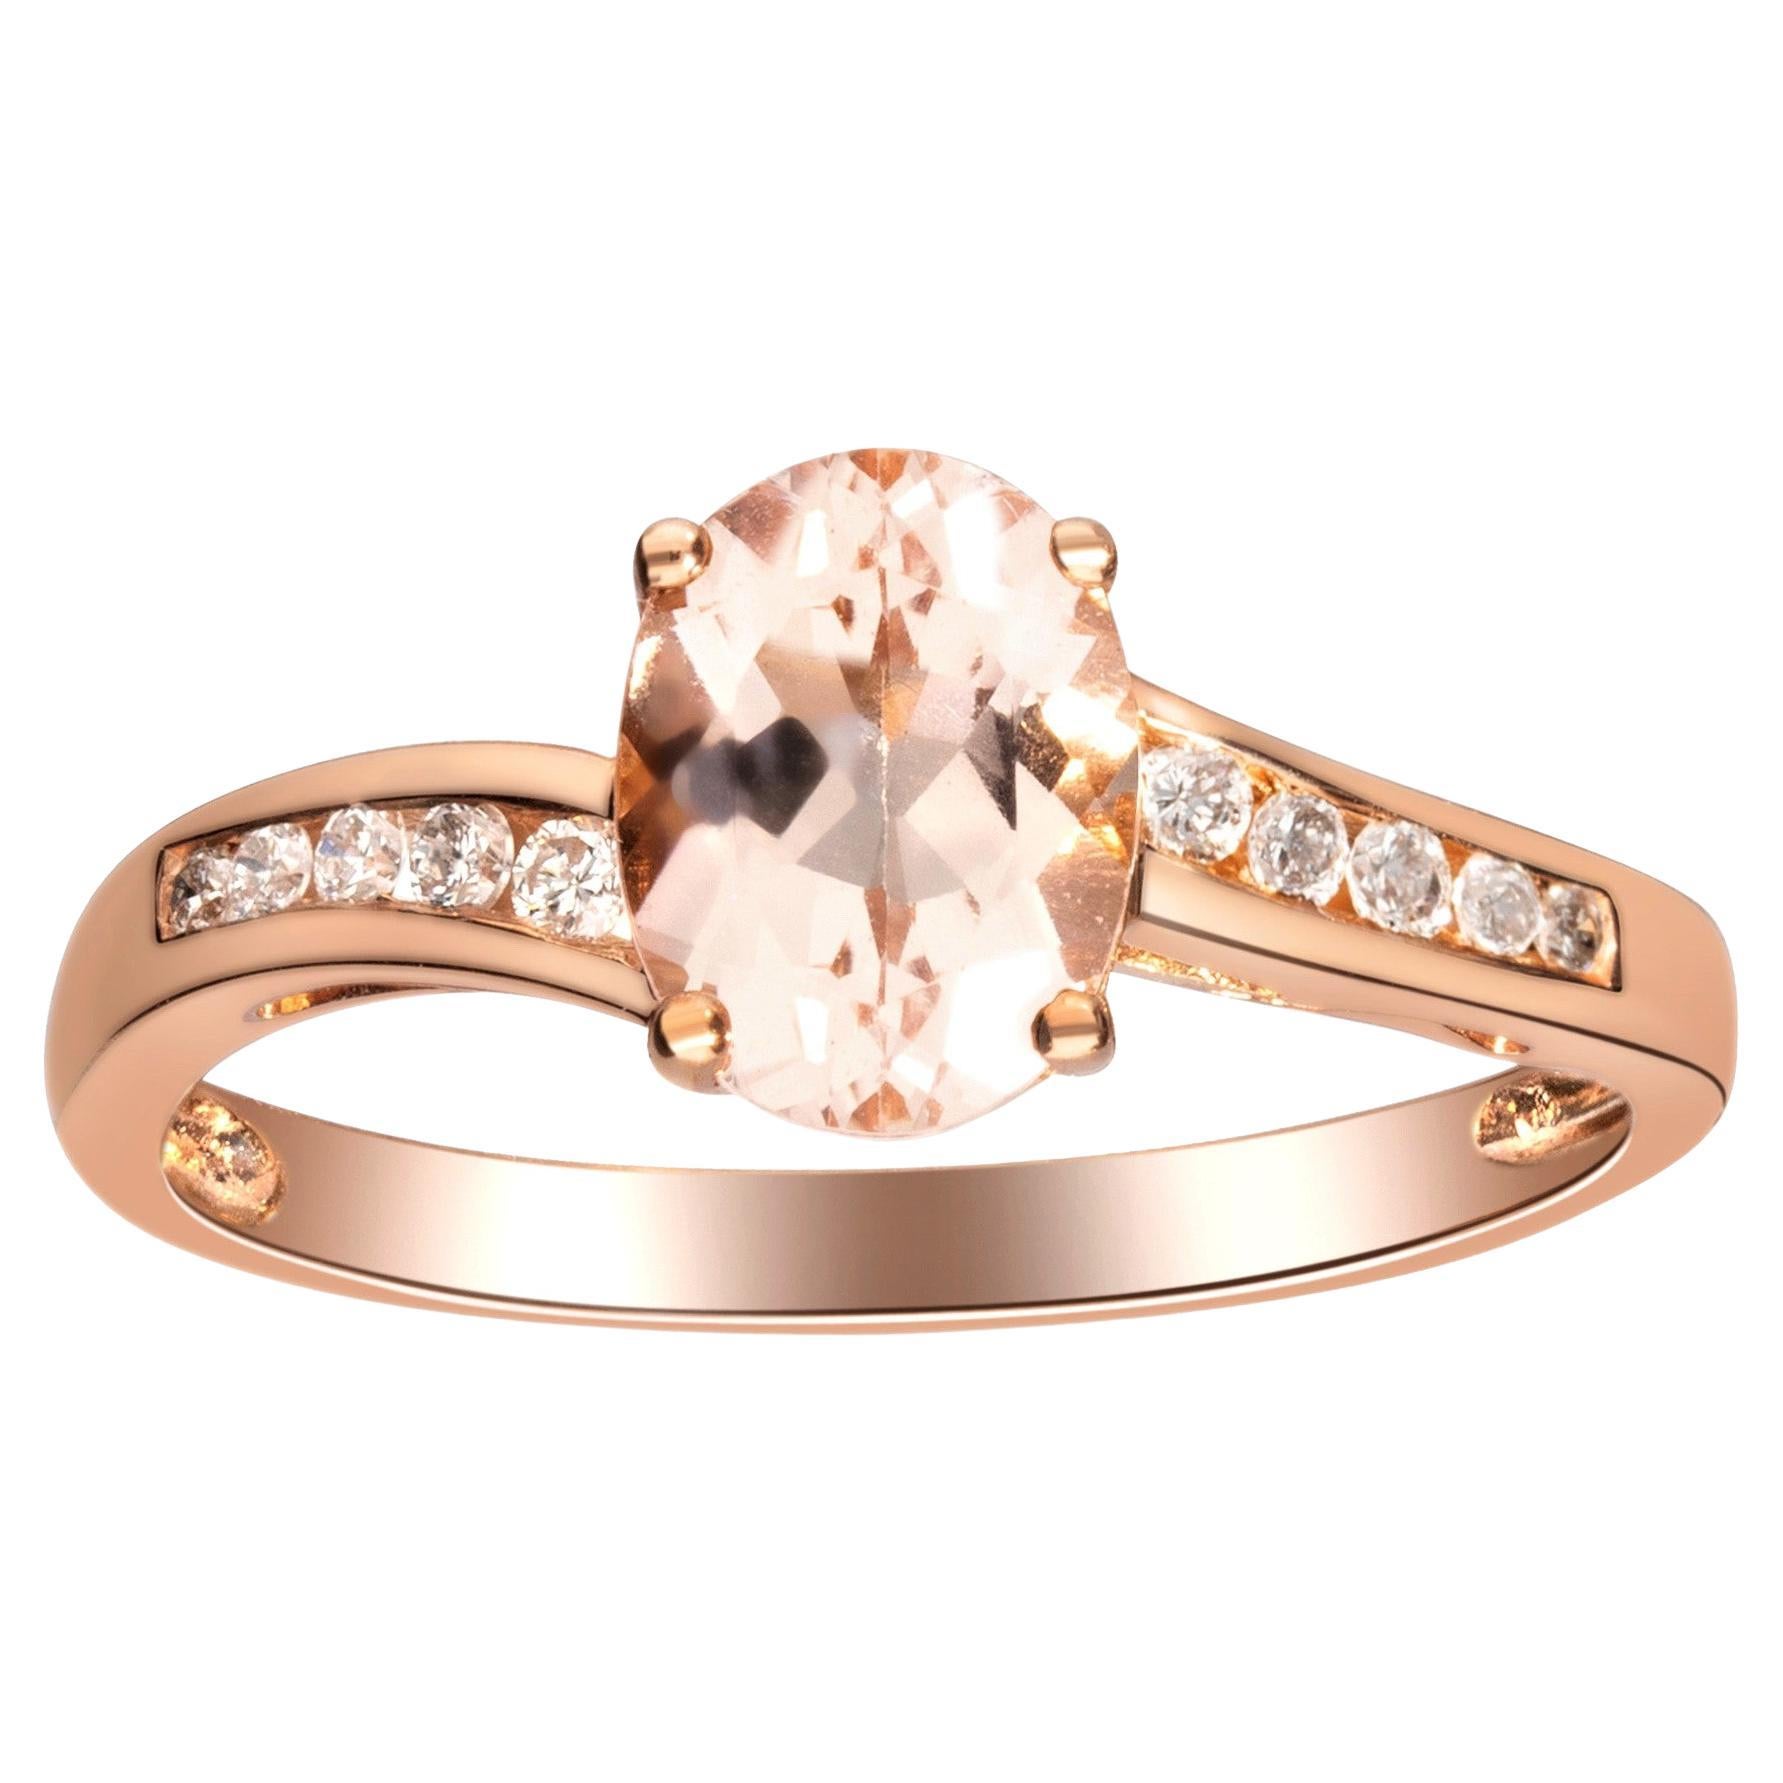 0.98 Carat Morganite Oval Cut Diamond Accents 10K Rose Gold Bridal Ring For Sale